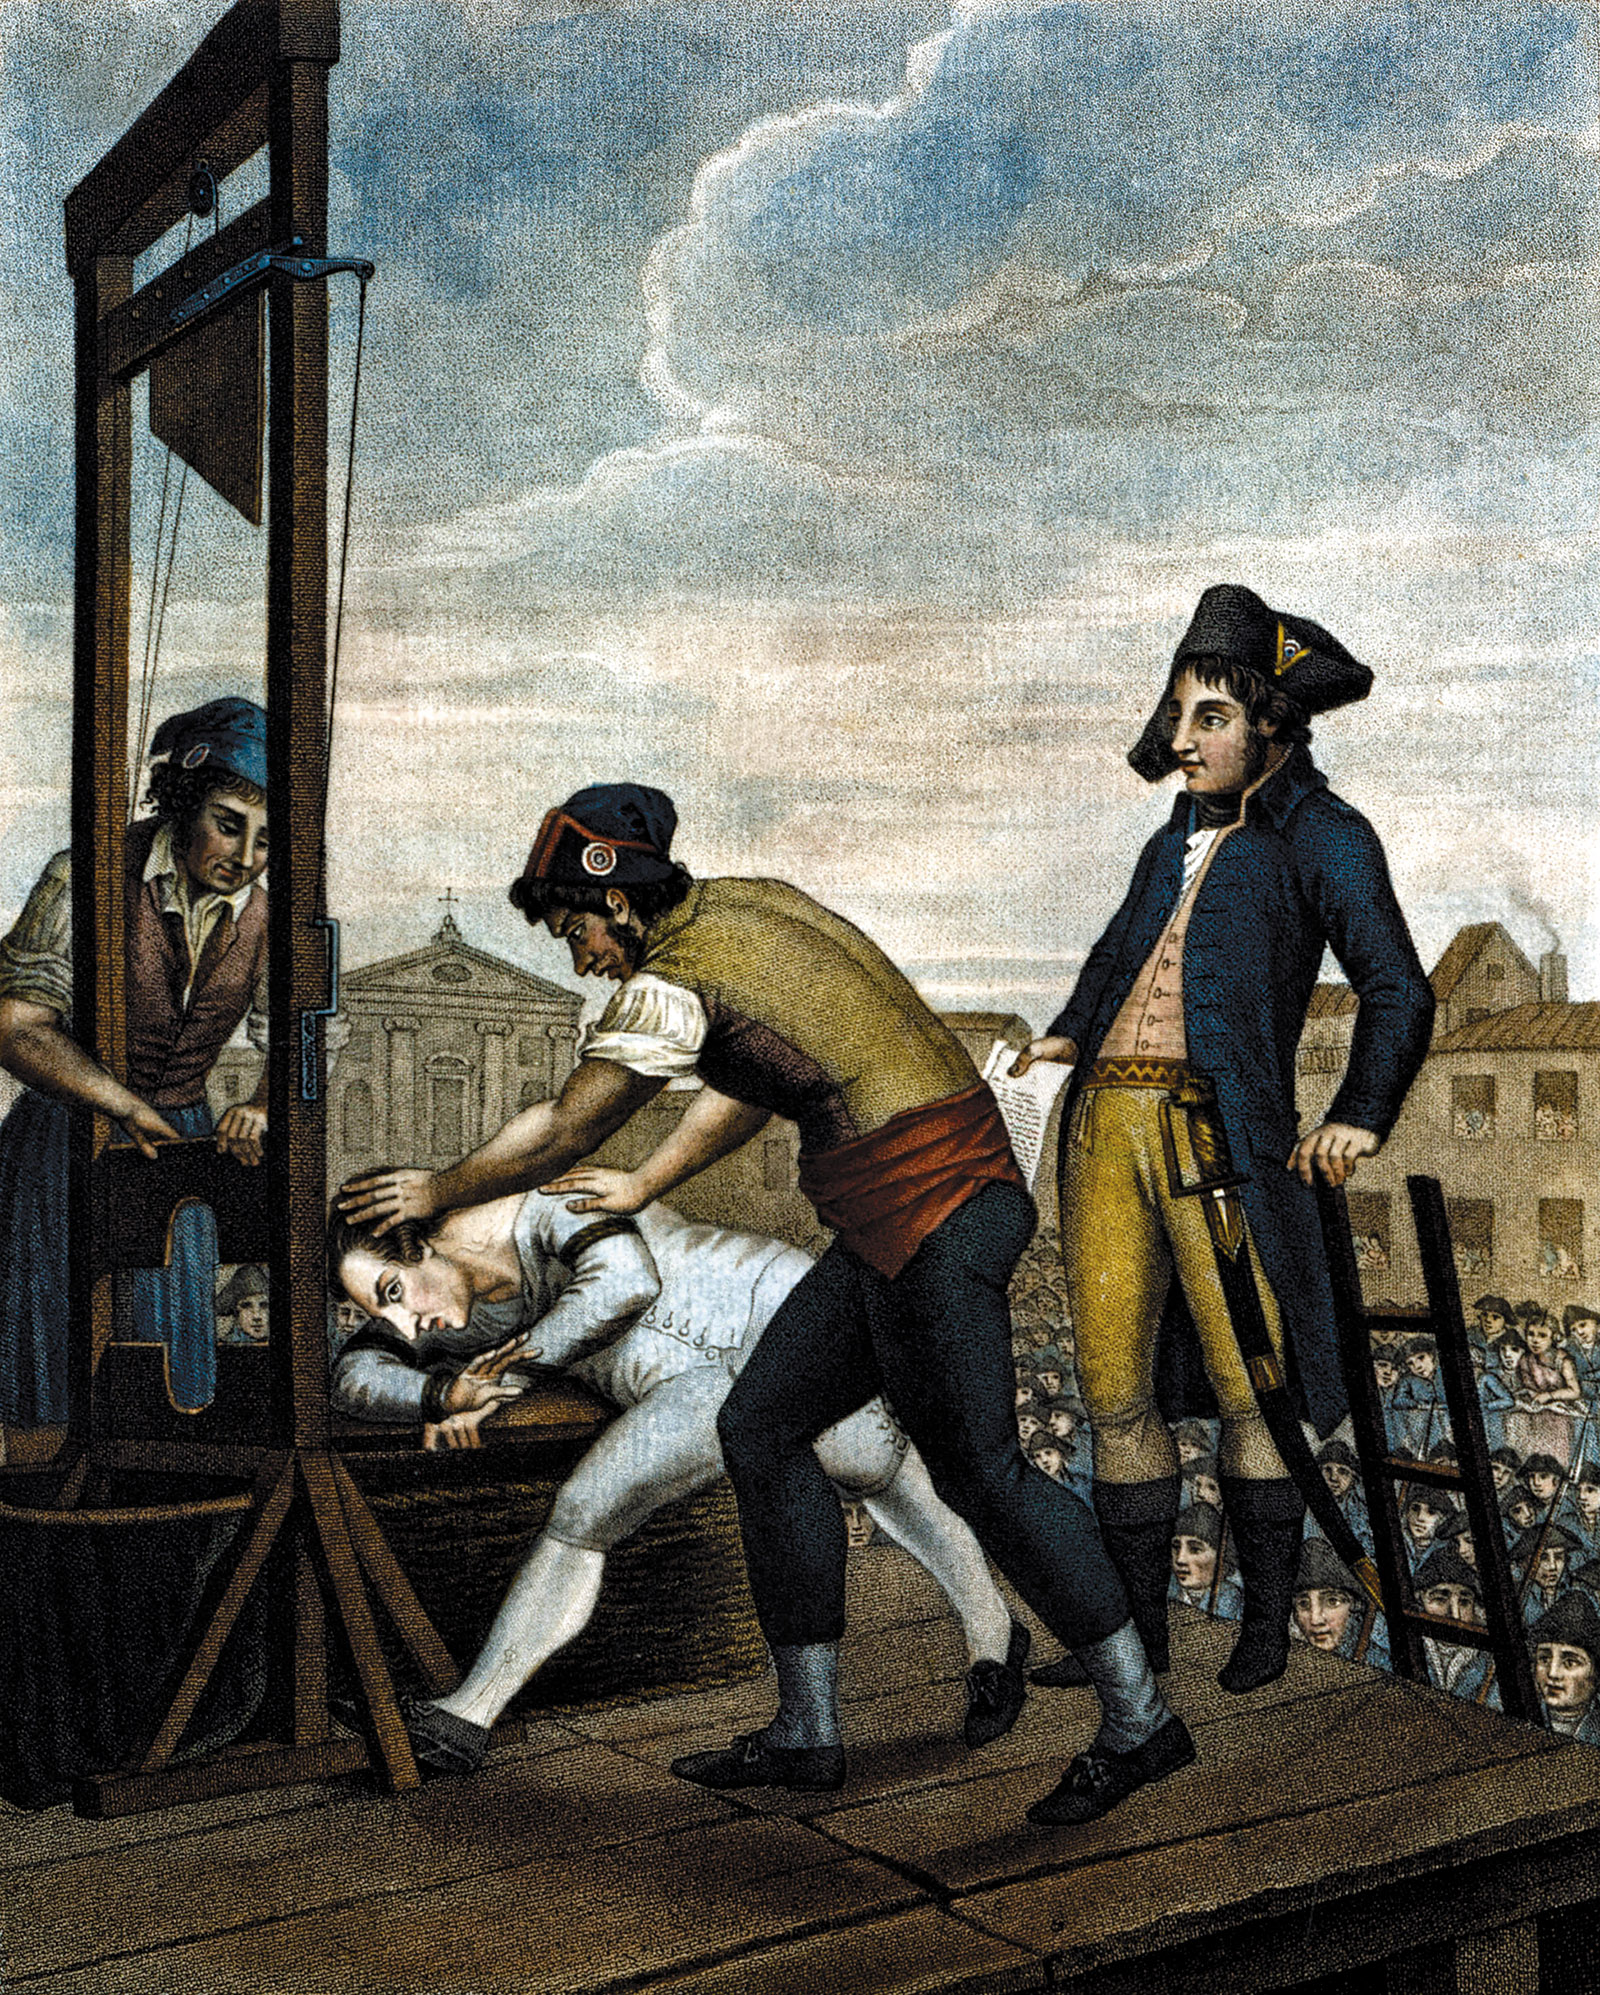 The execution of Maximilien Robespierre in Paris on July 28, 1794